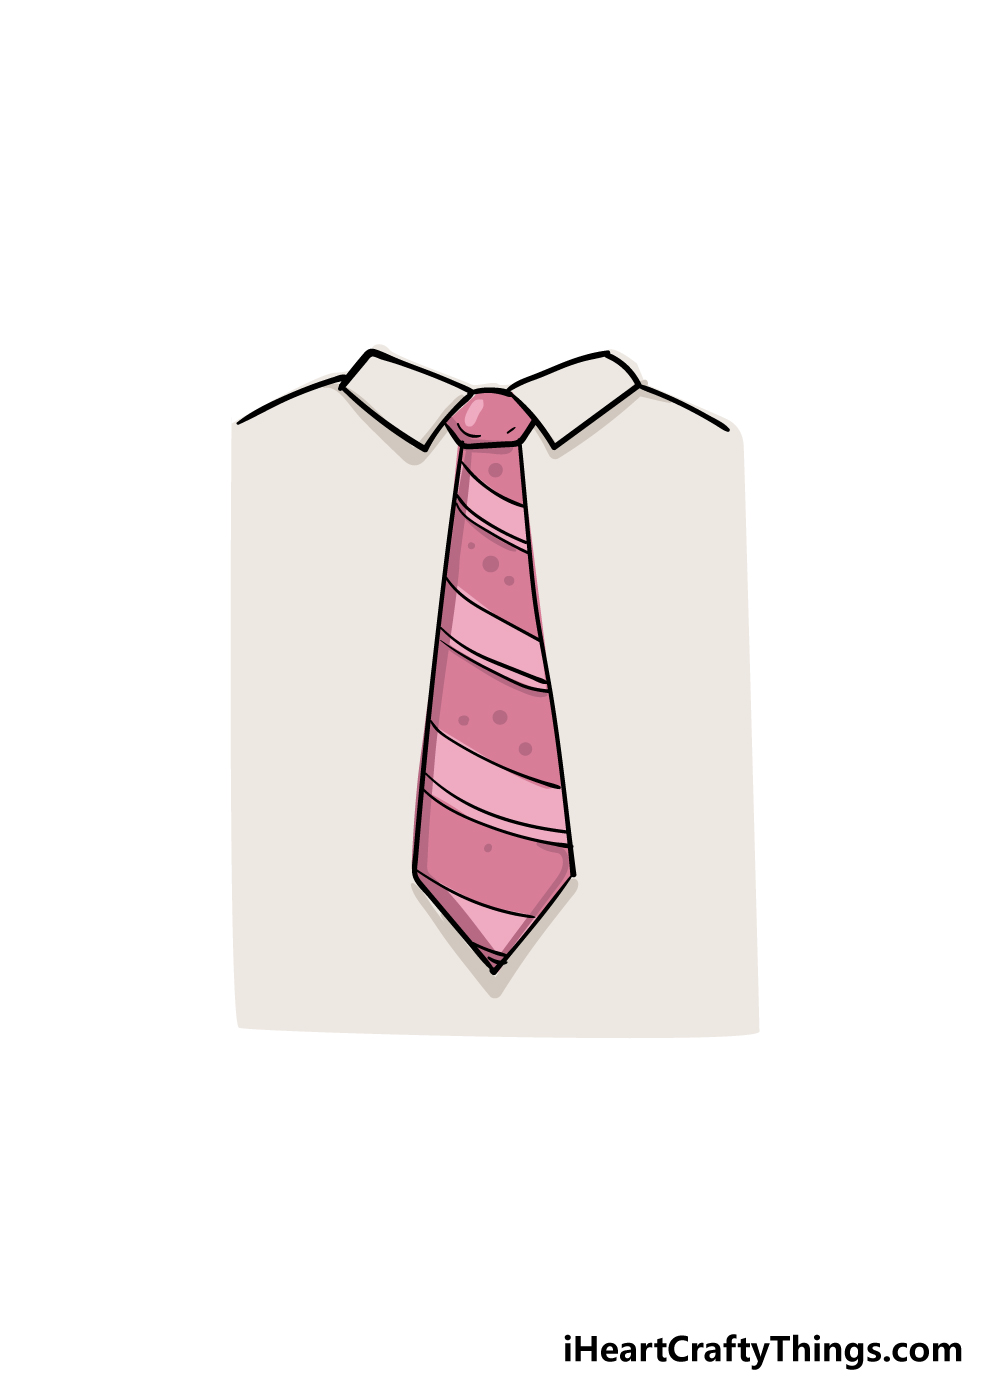 Tie Drawing How To Draw A Tie Step By Step